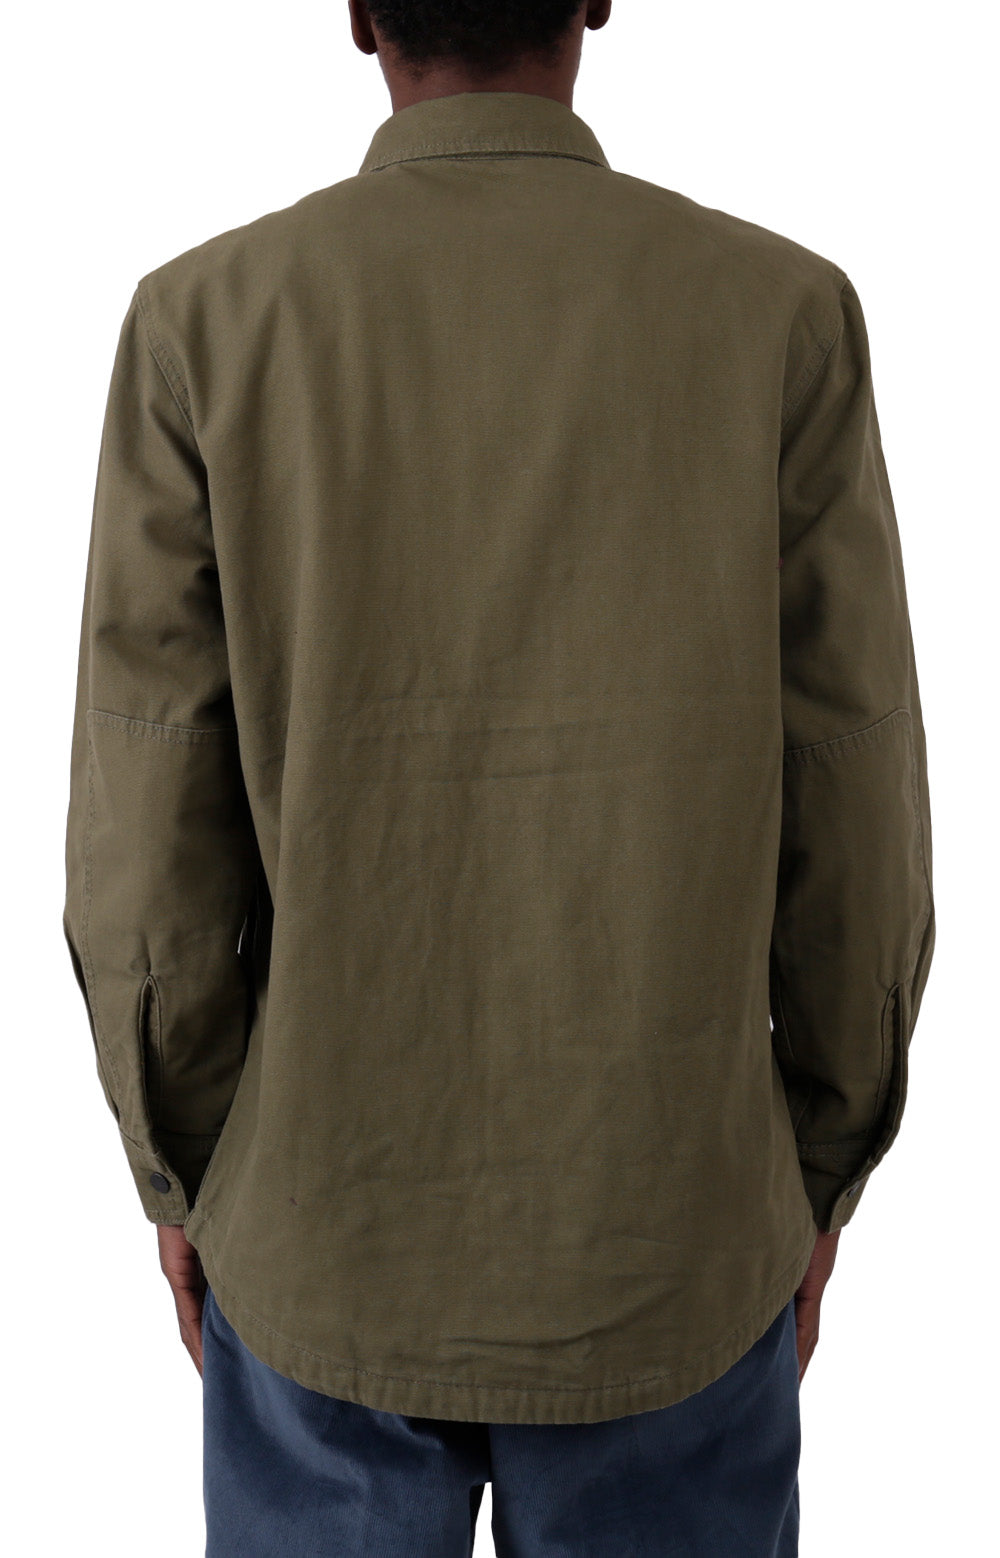 (WL658ML) Duck Flannel Lined Shirt - Military Green